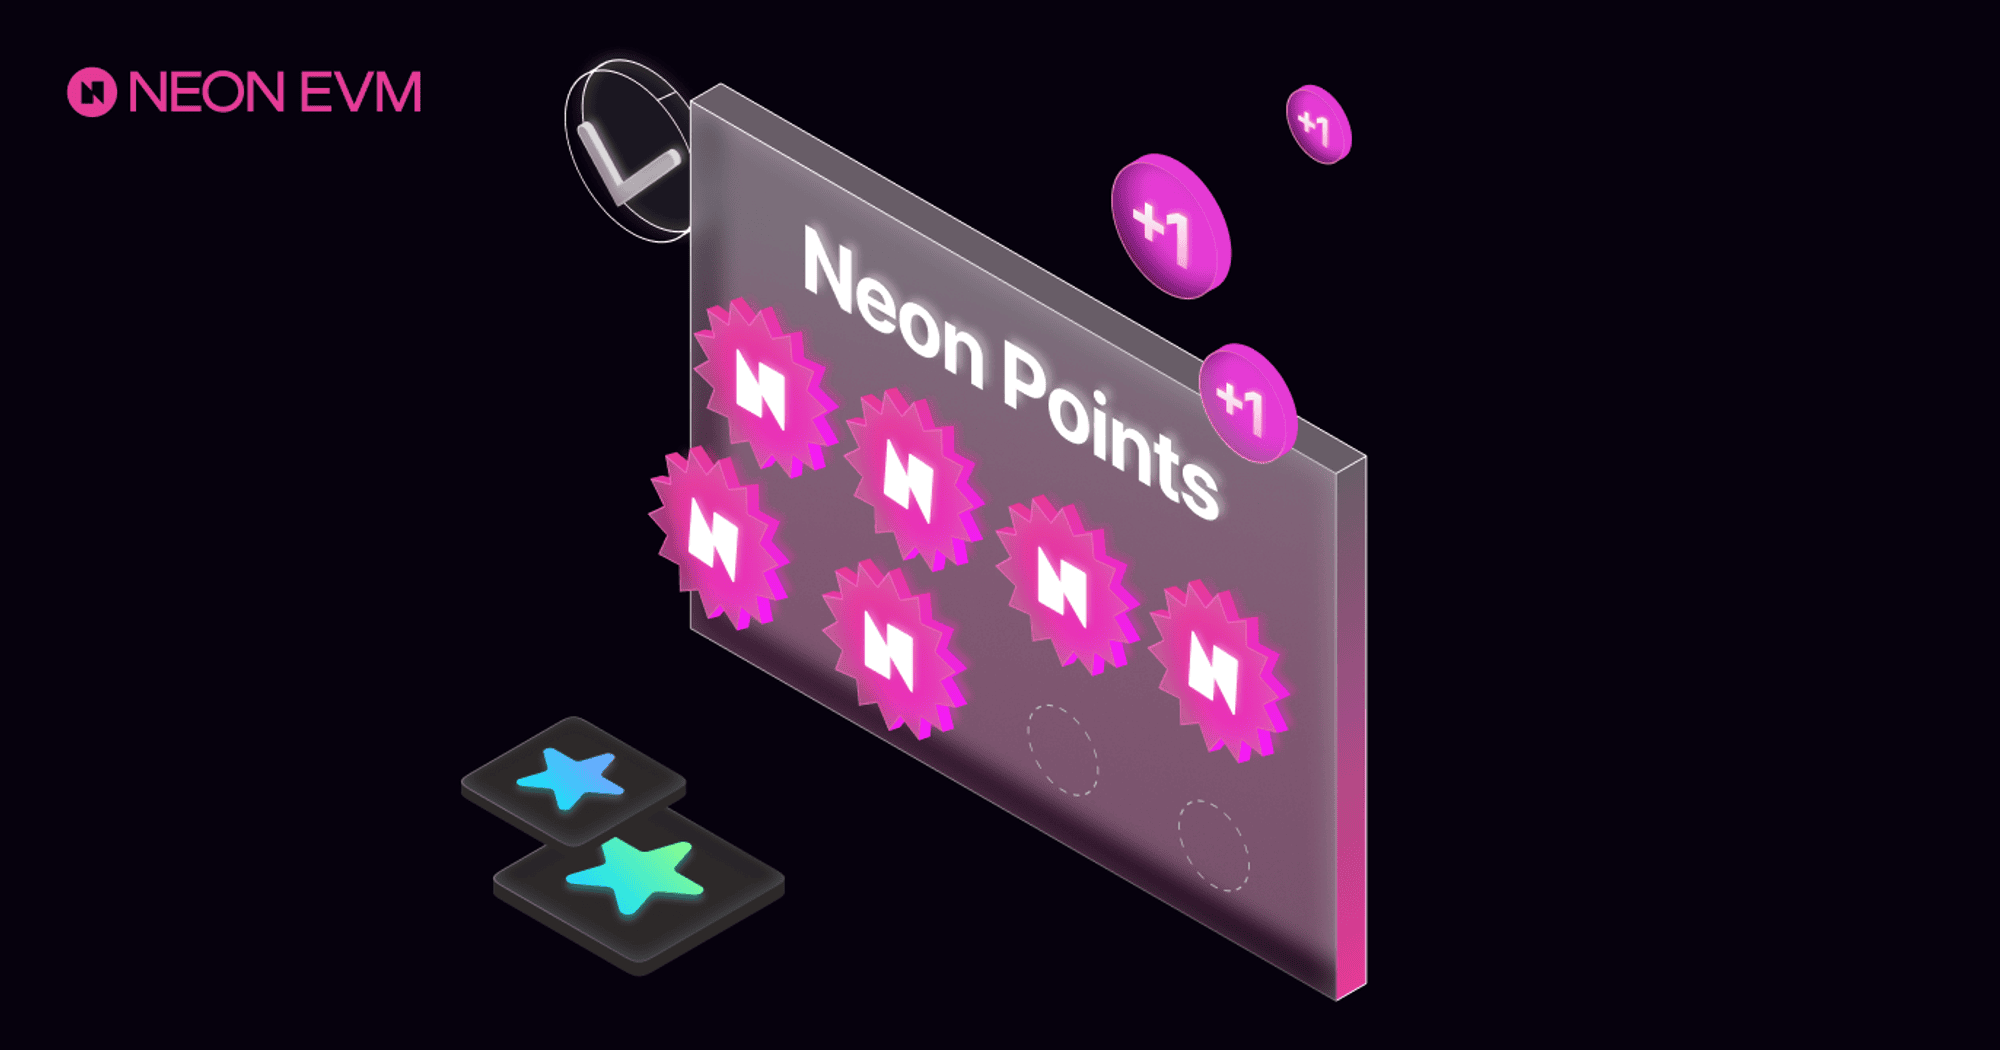 Announcing Neon Points